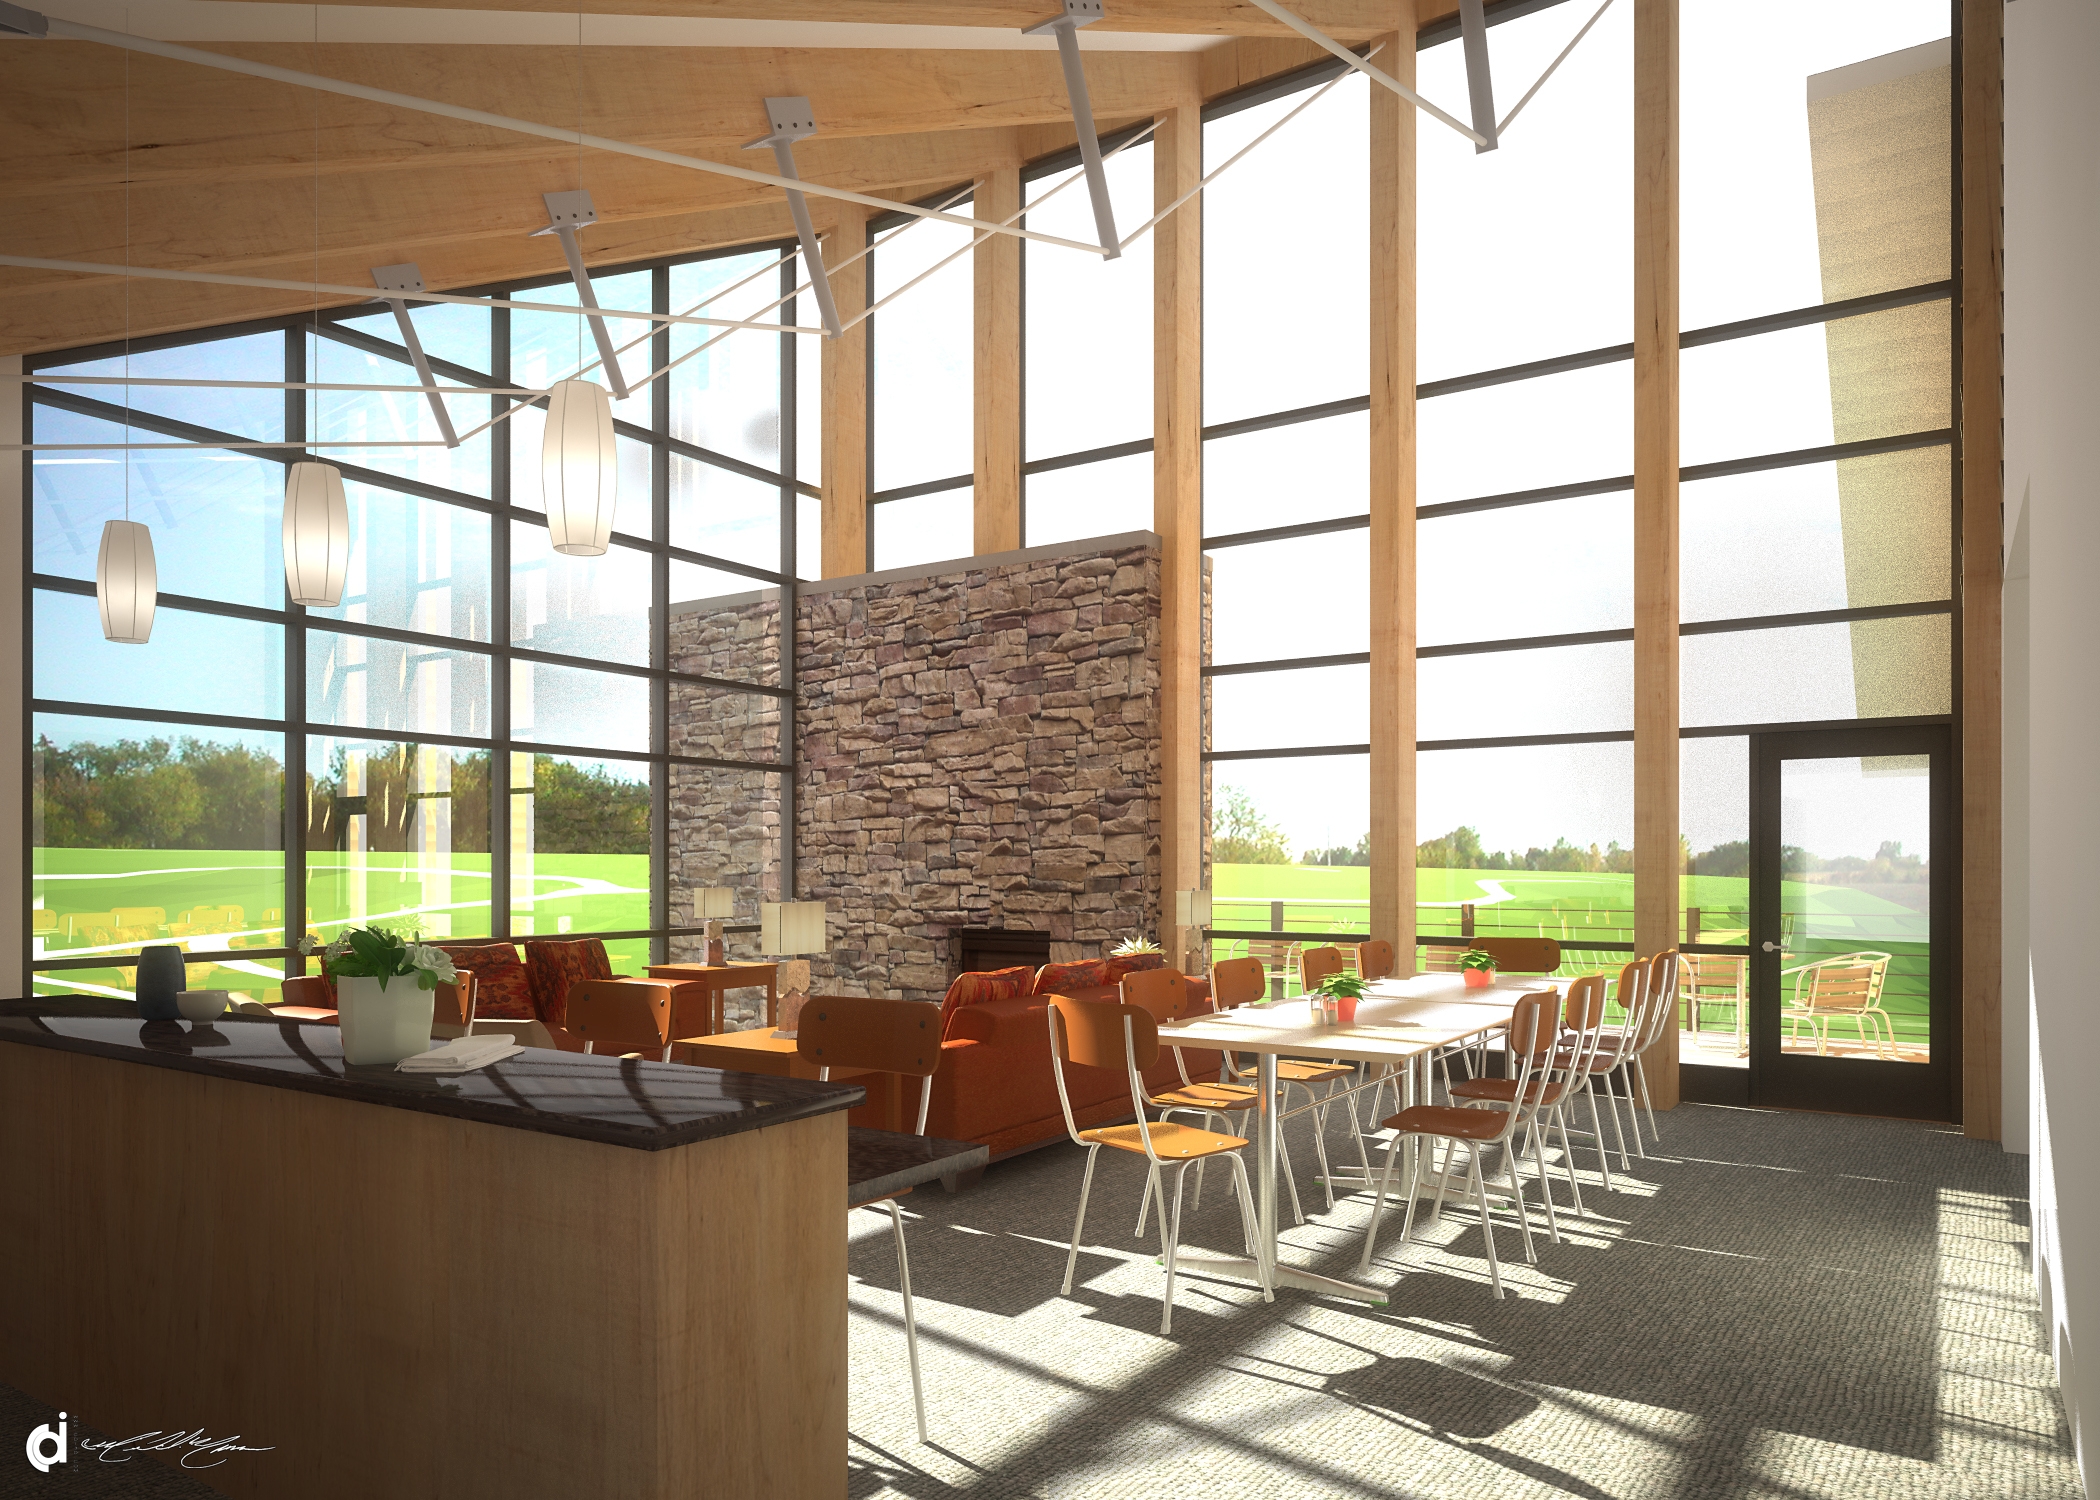 Inside the Newberg dining hall displaying floor to ceiling windows, chairs, and tables